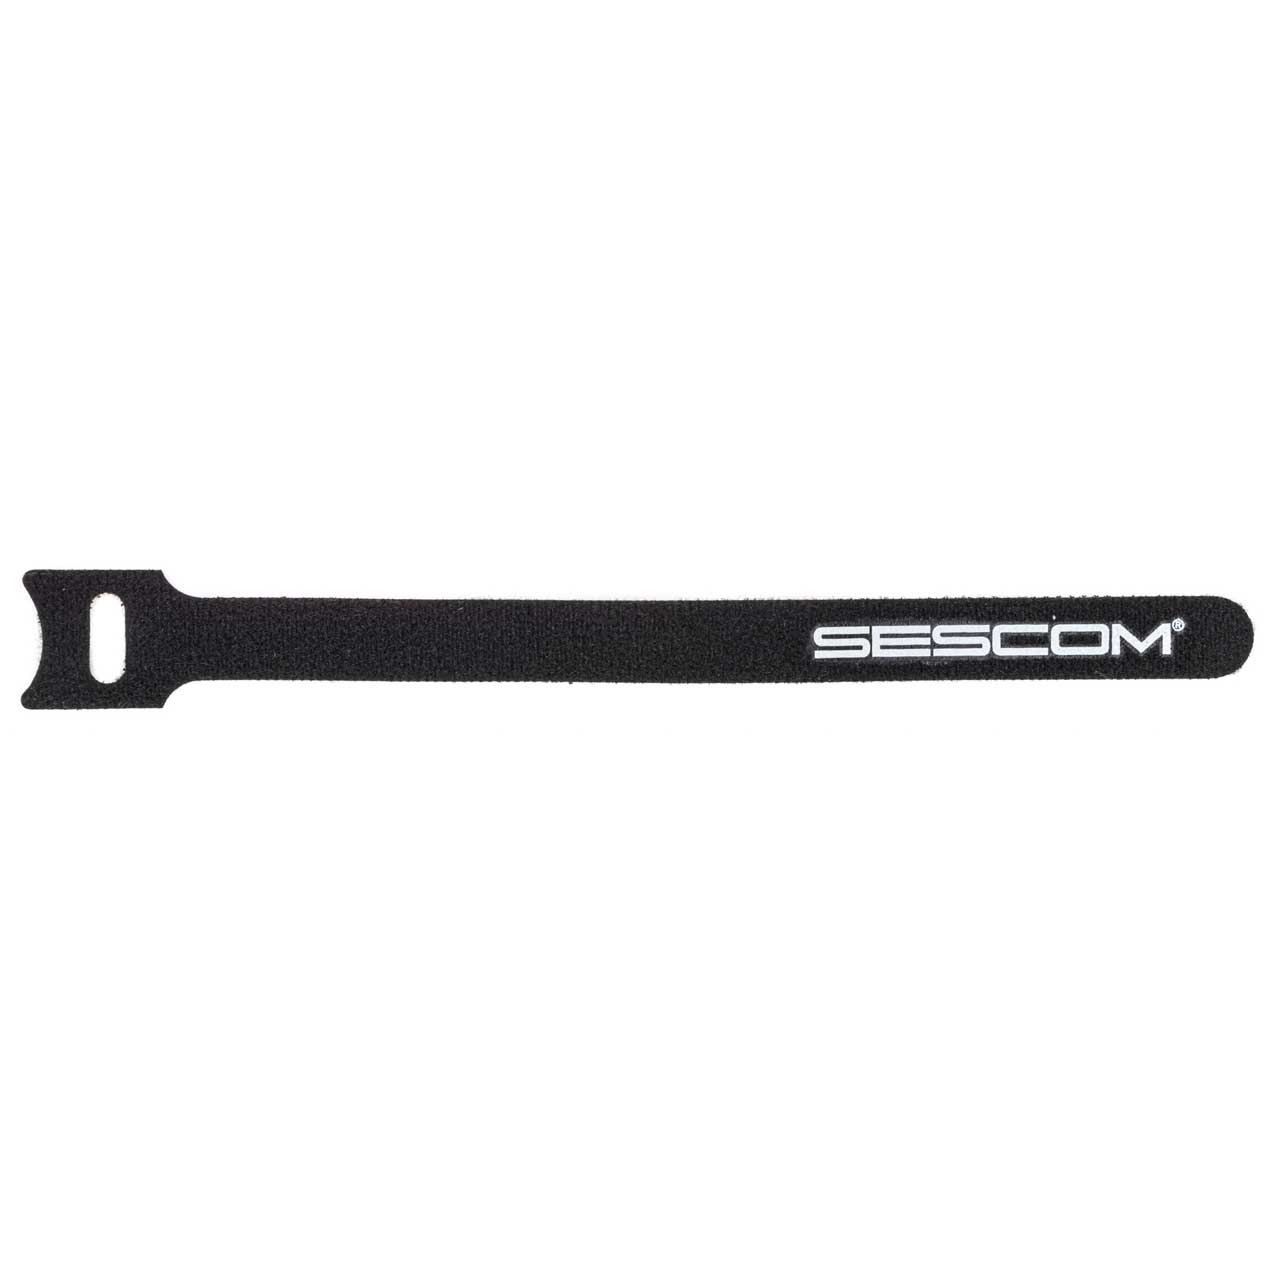 Sescom Hook and Loop Cable Wrap 12mm x 180mm Black with White Logo - 500 Pack SES-HKNLP-500PK